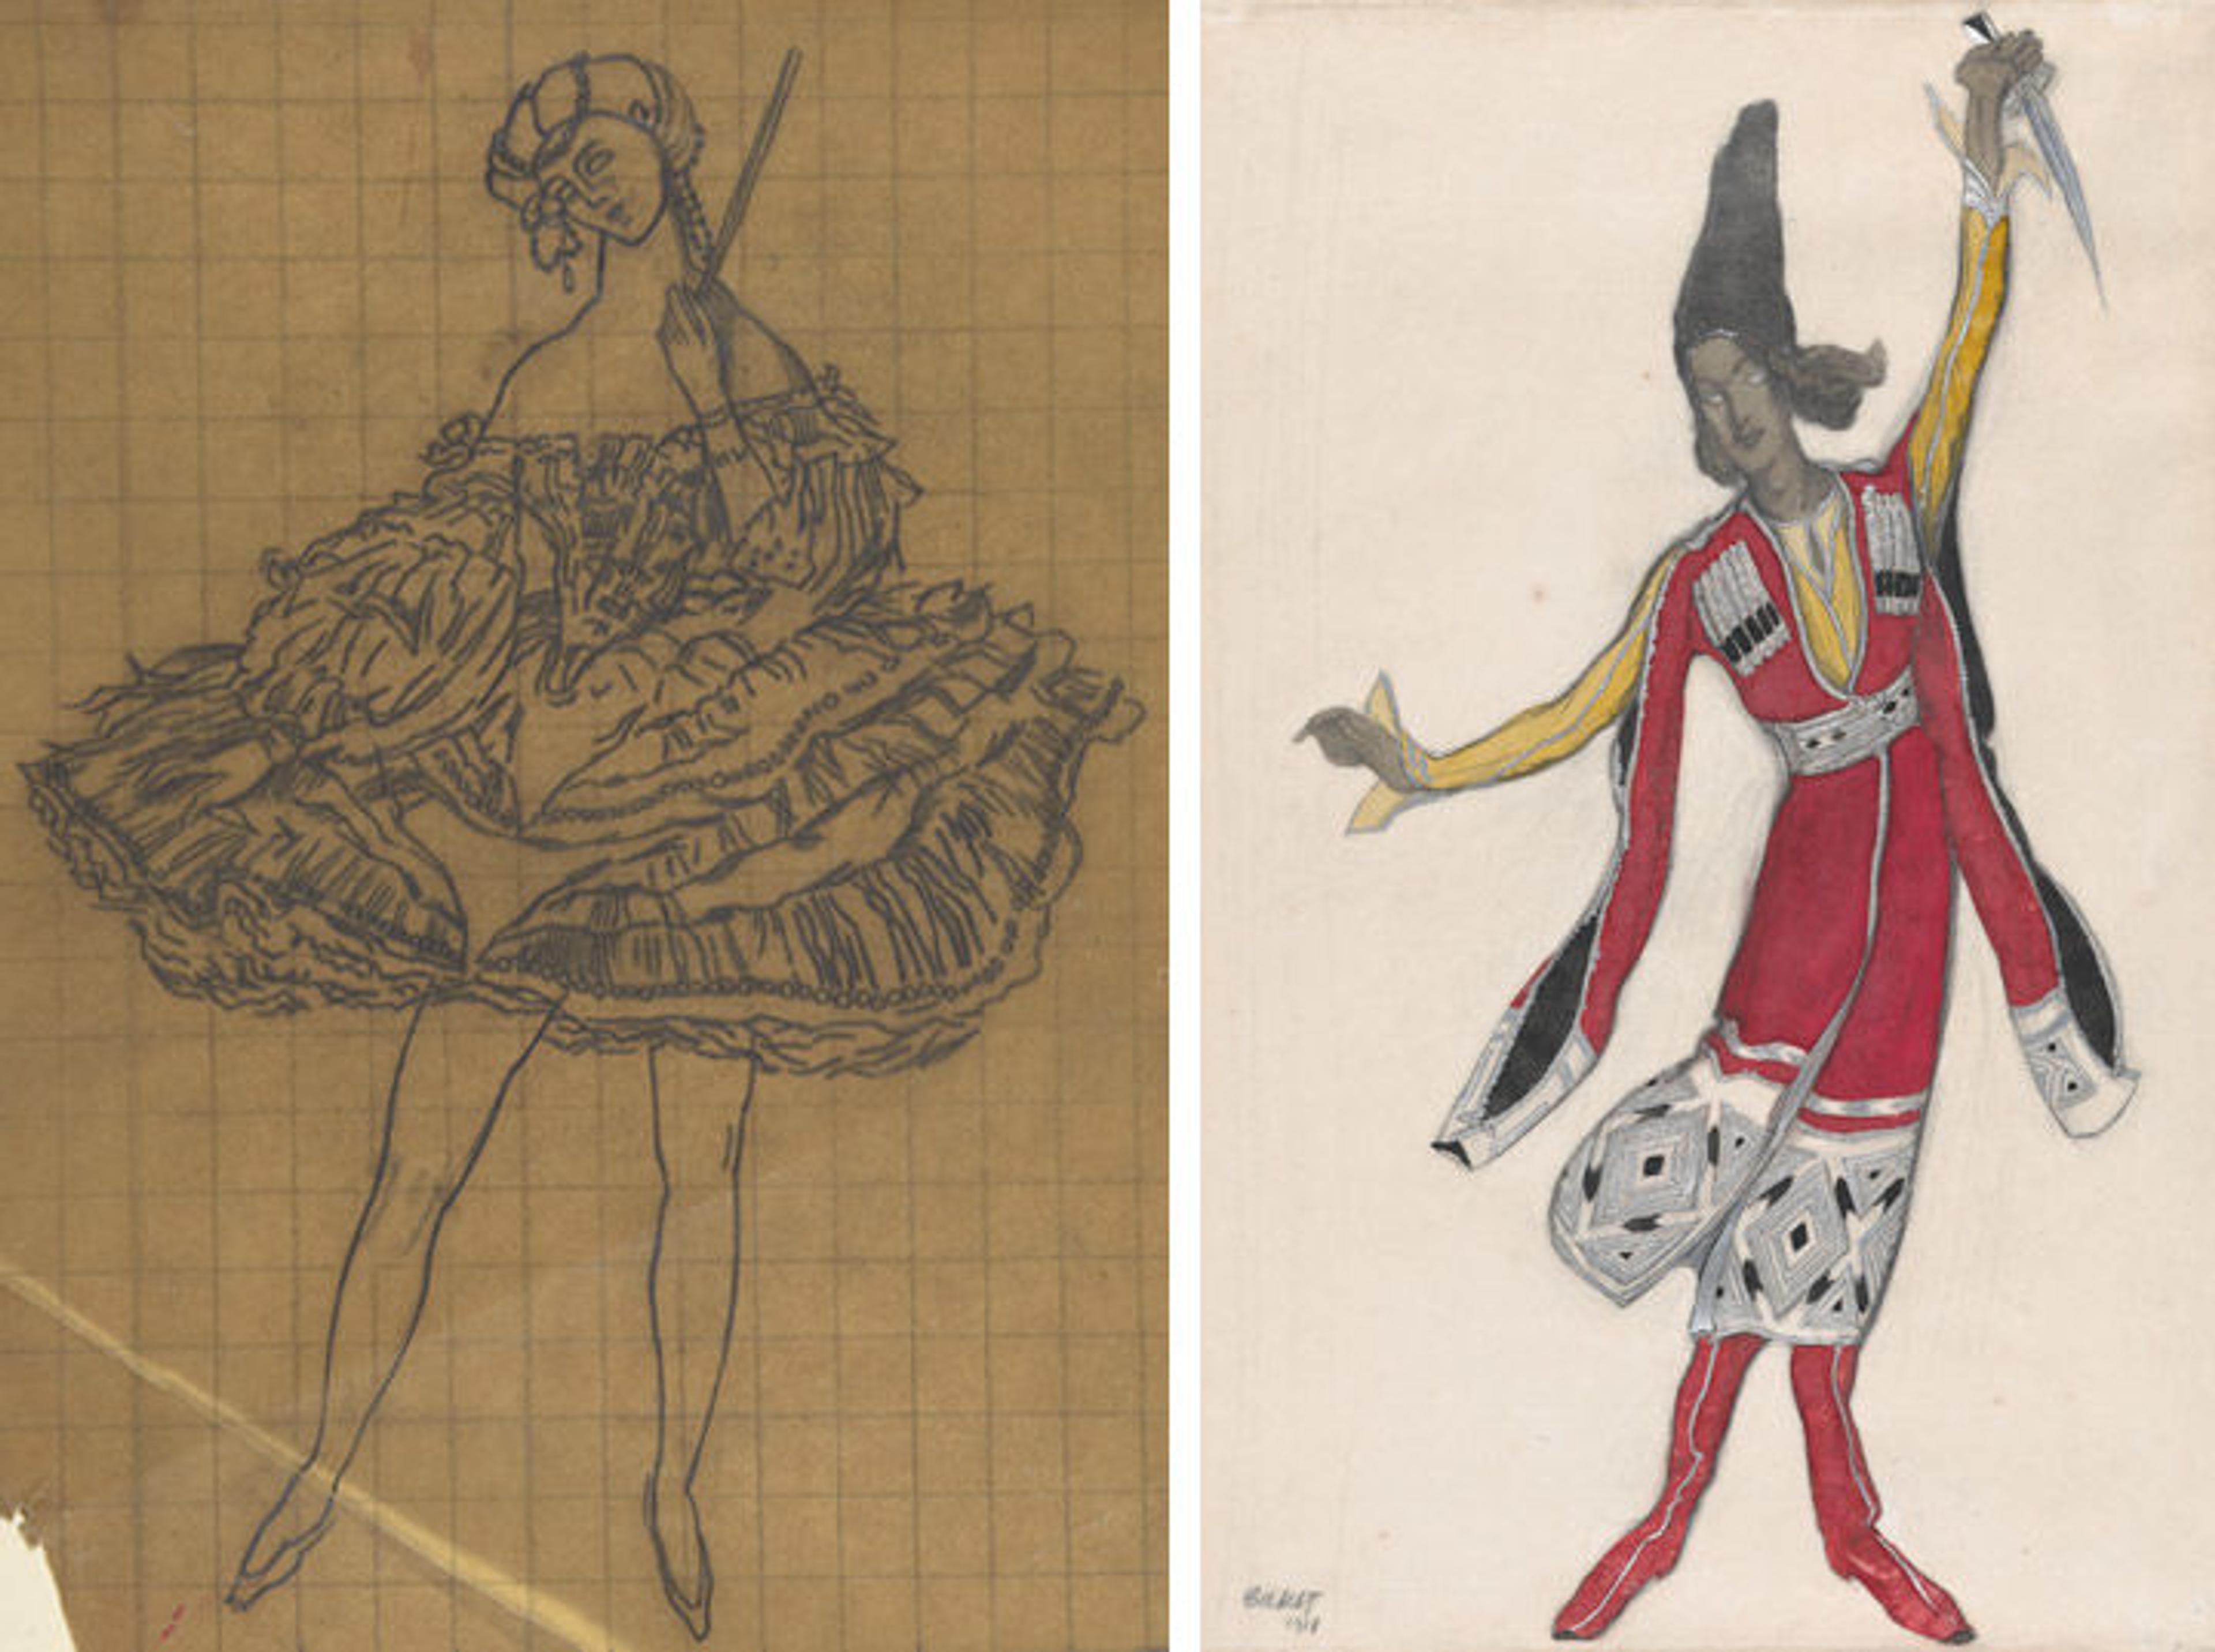 Two costume designs by Leon Bakst for the Ballet Russes